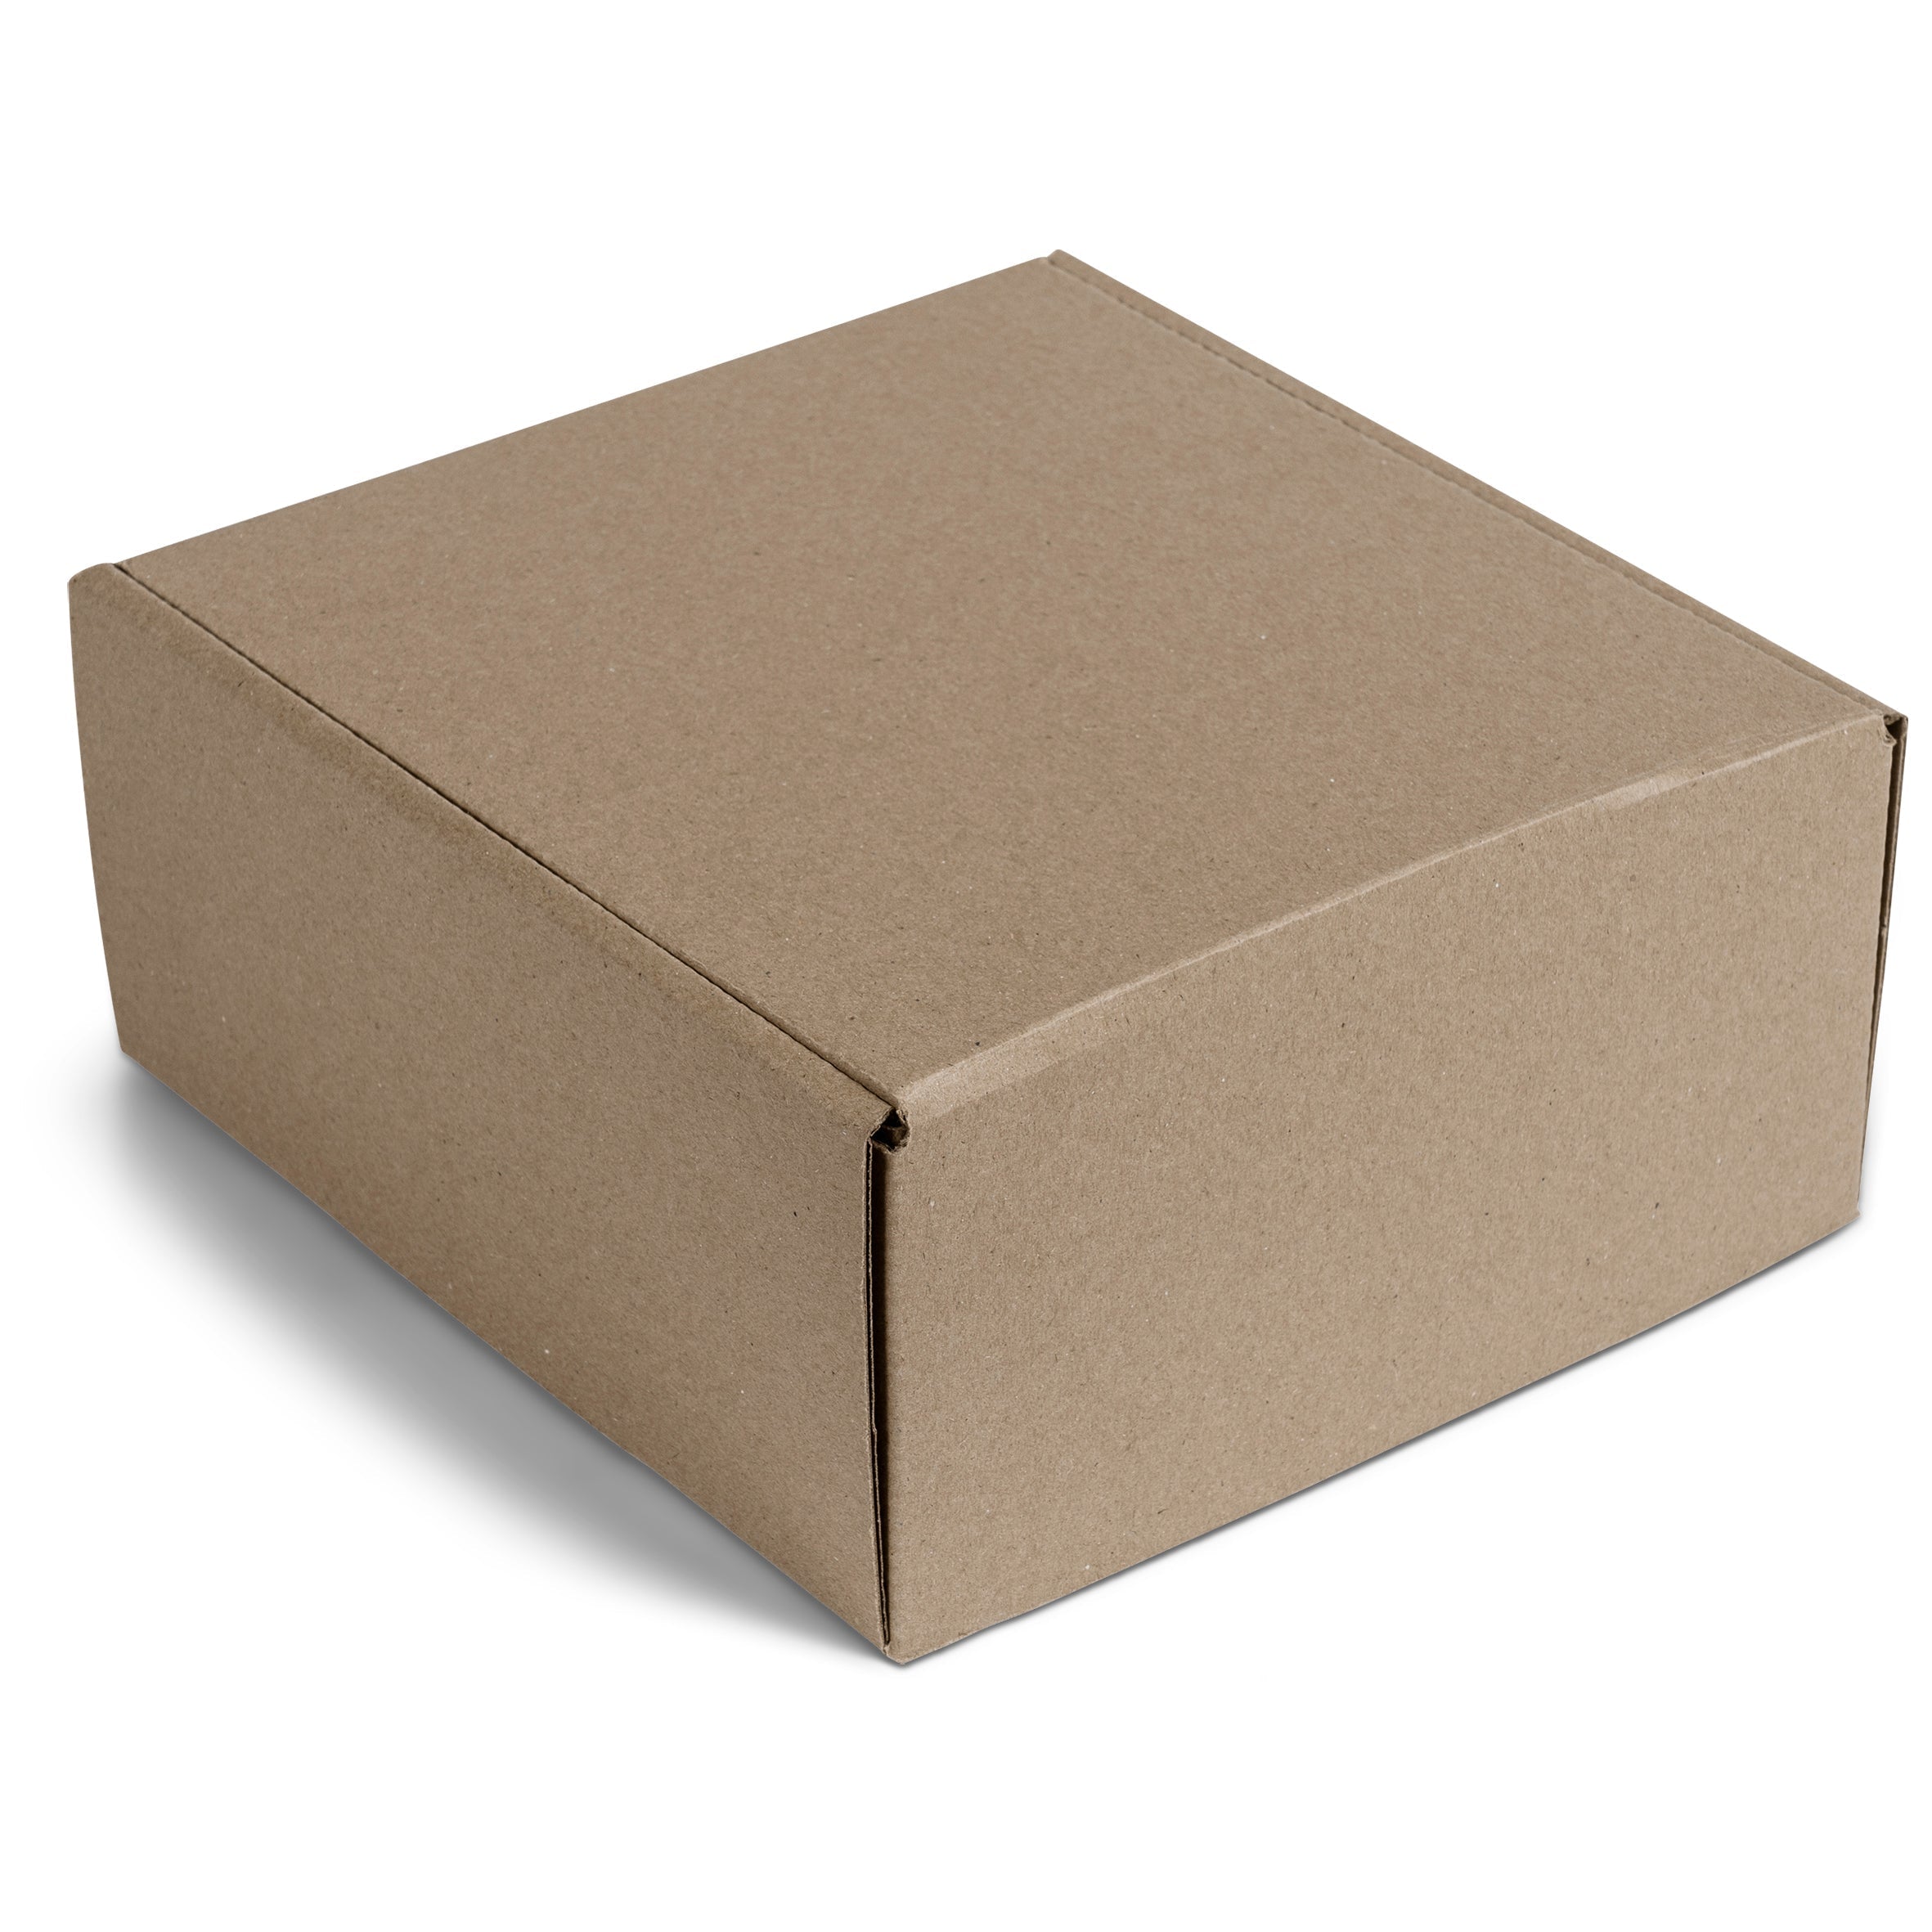 Unbranded corrugated cardboard gift box shown in a closed position.